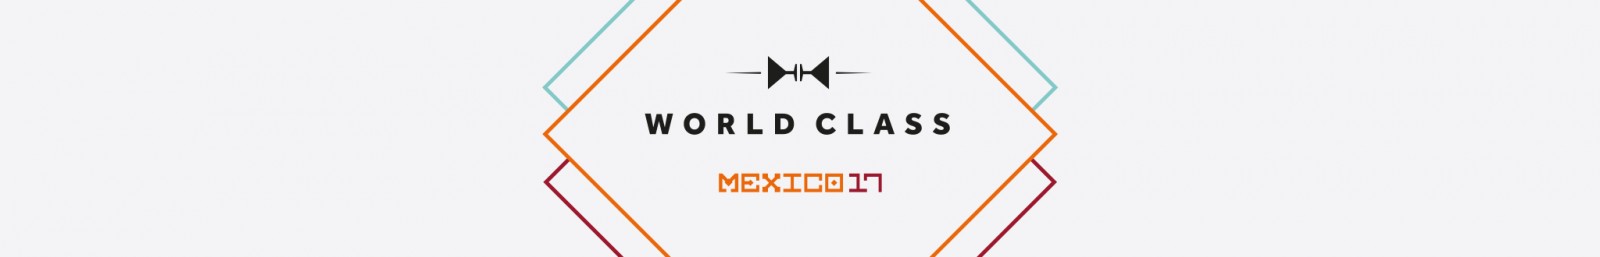 Worldclass Mexico 2017 is on